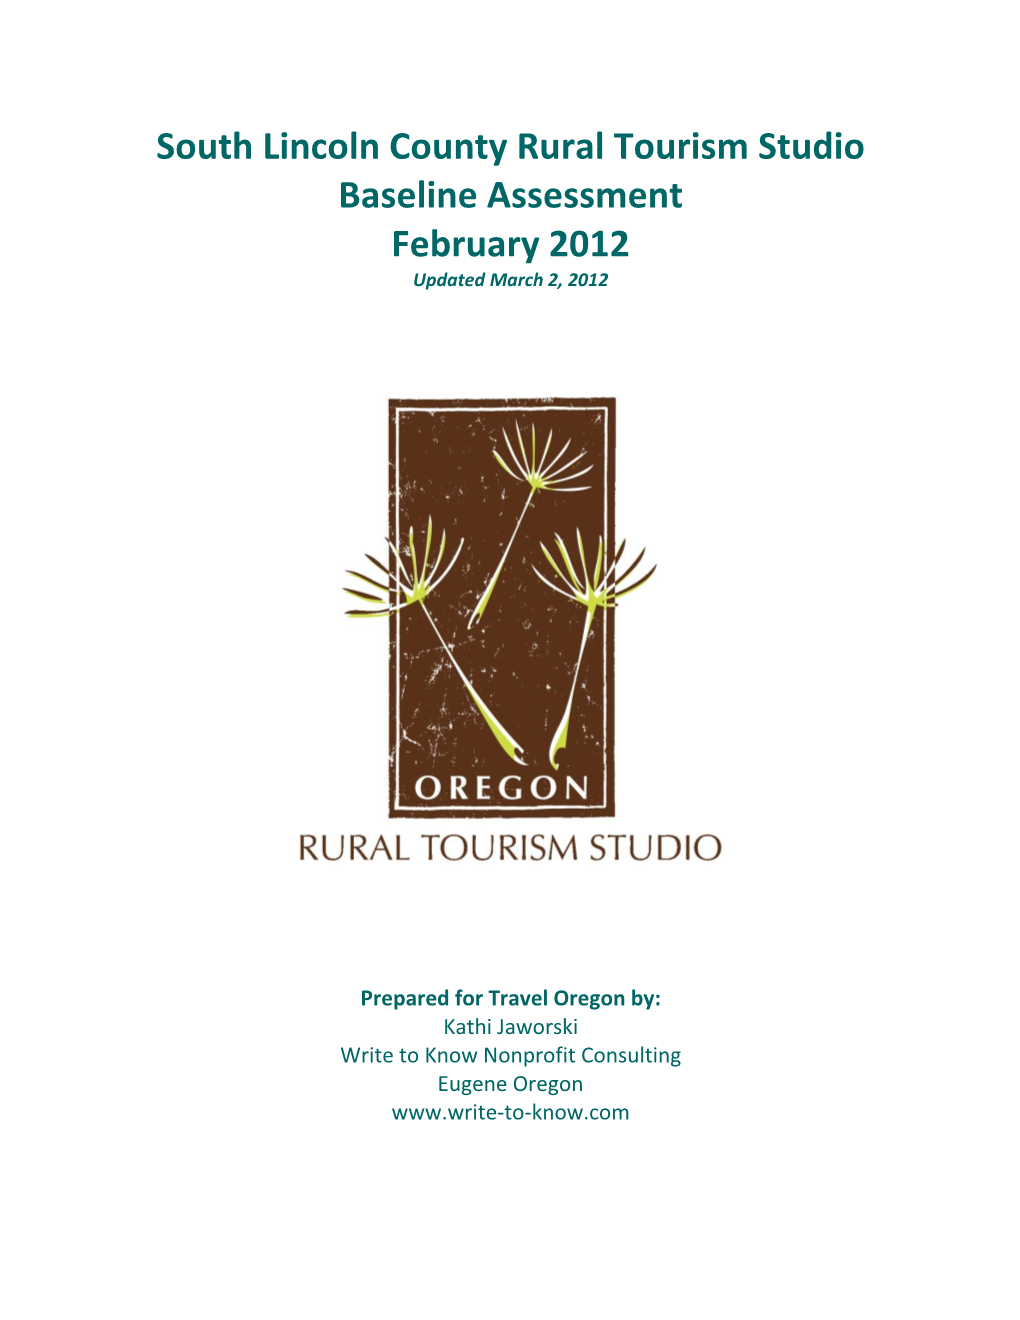 South Lincoln County Rural Tourism Studio Baseline Assessment Contents